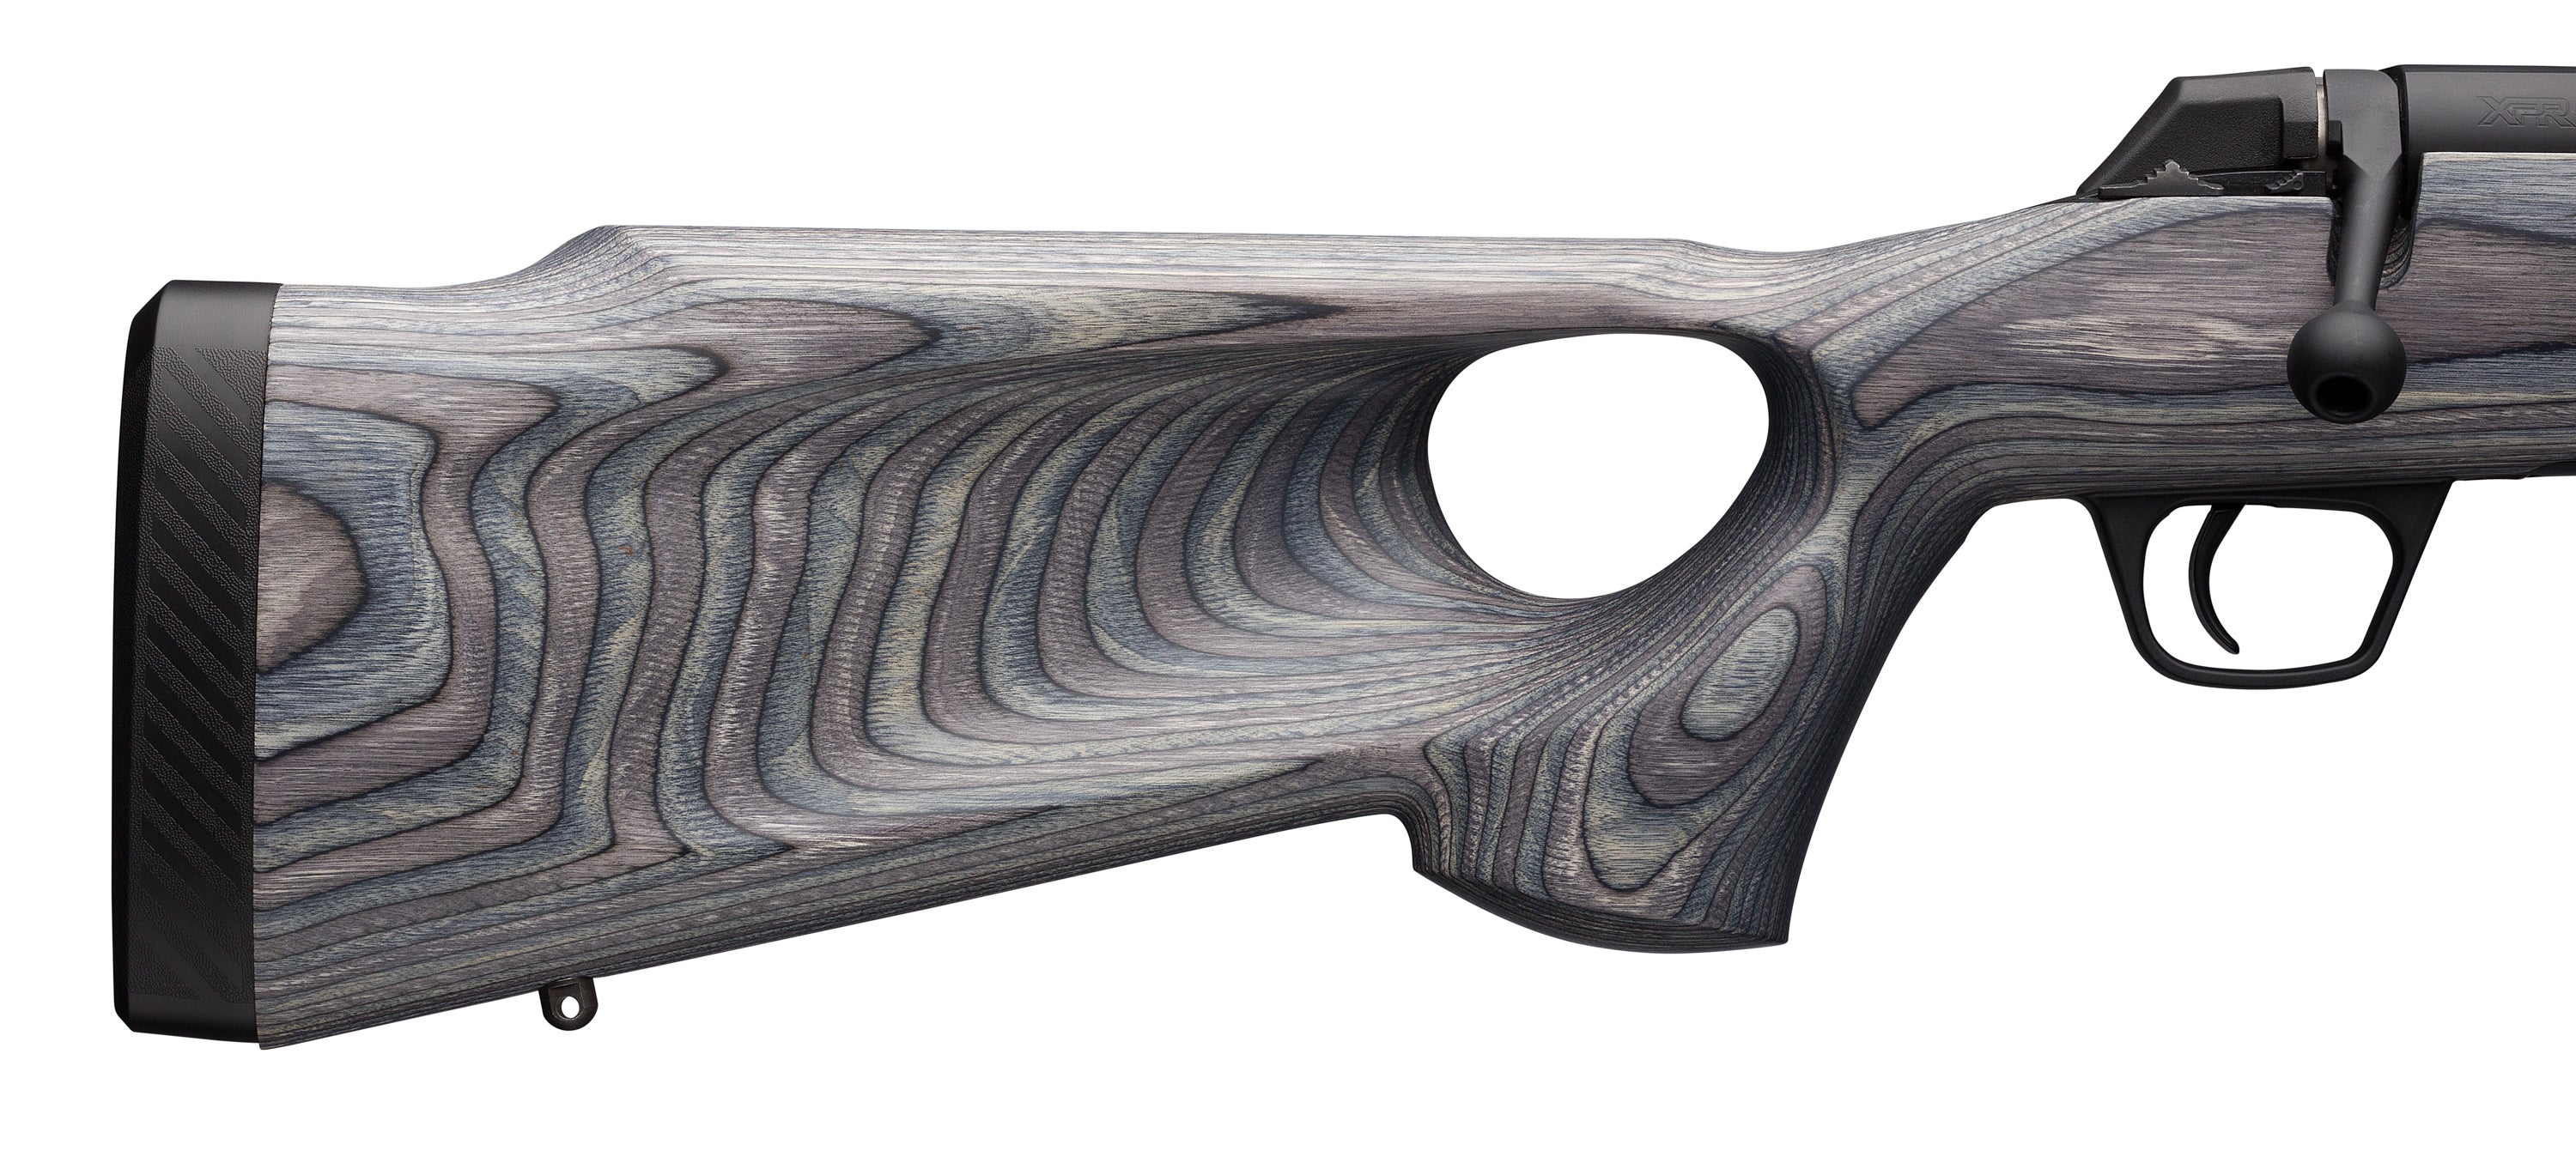 https://www.winchesterguns.com/content/dam/winchester-repeating-arms/products/rifles/xpr/2019/thumbhole-varmint/Winchester%20XPR%20Thumbhole%20Warmint%20-%20535727212_D5.jpg